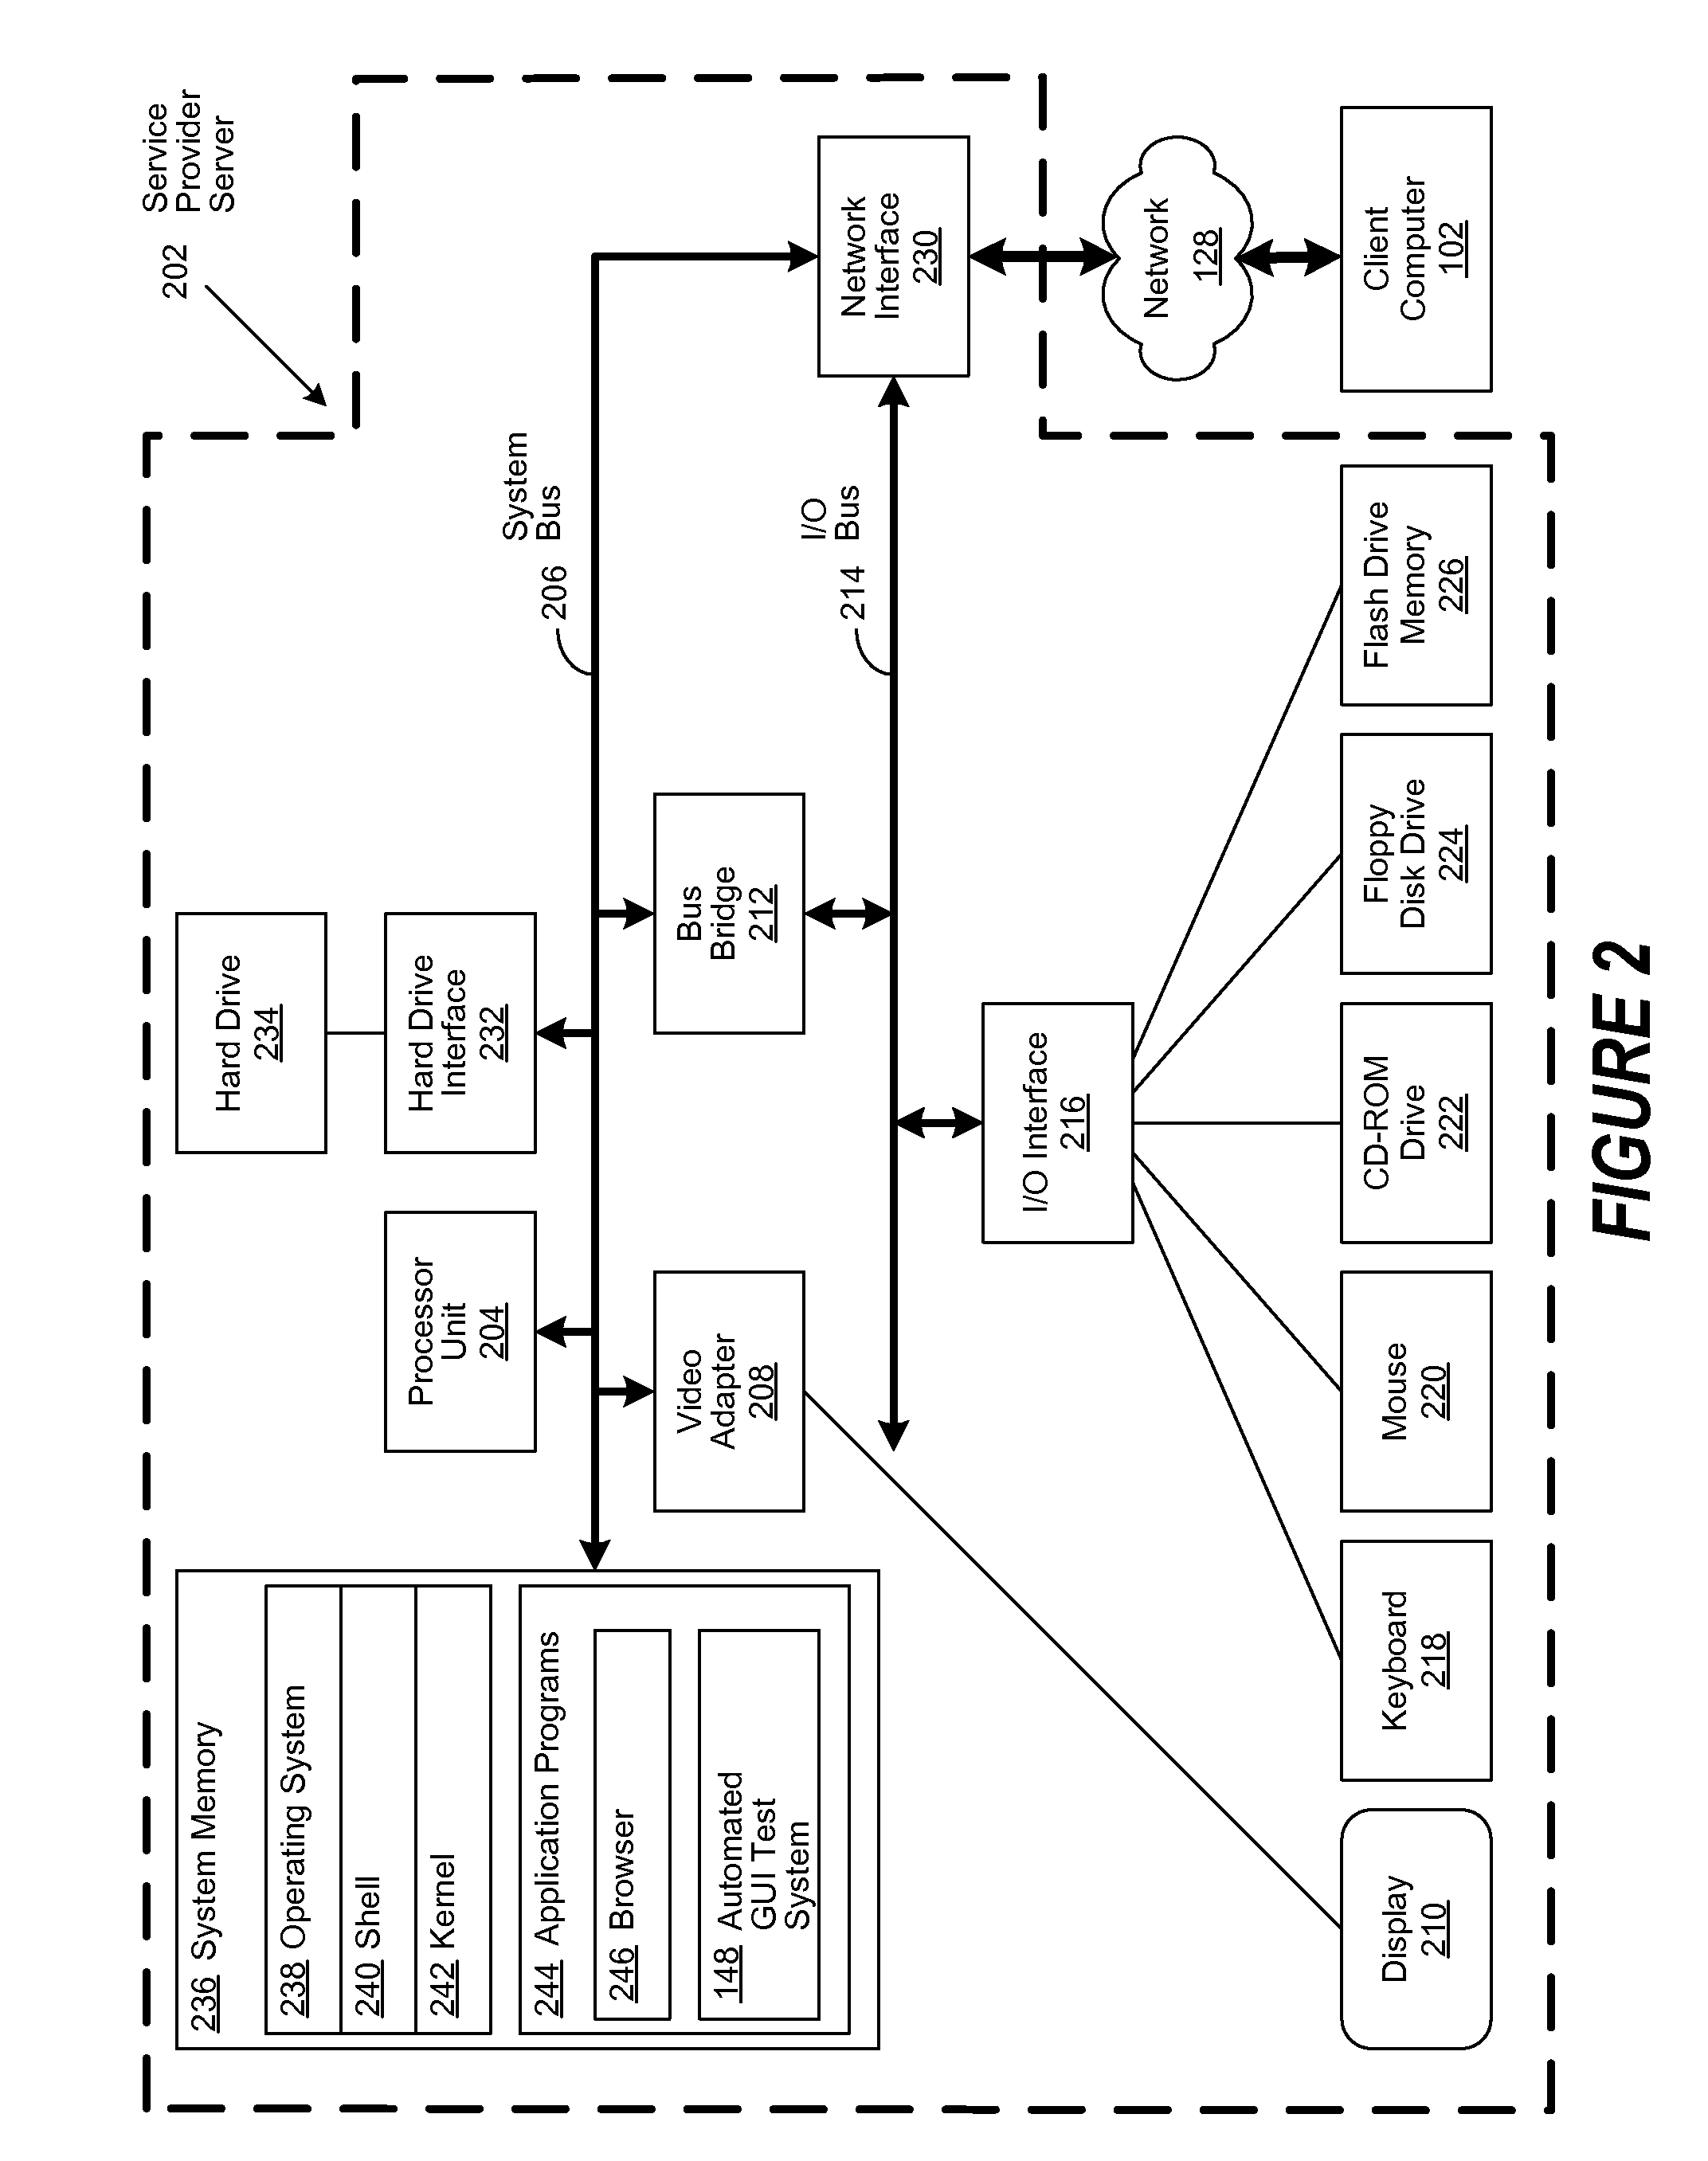 Method for Creating Error Tolerant and Adaptive Graphical User Interface Test Automation